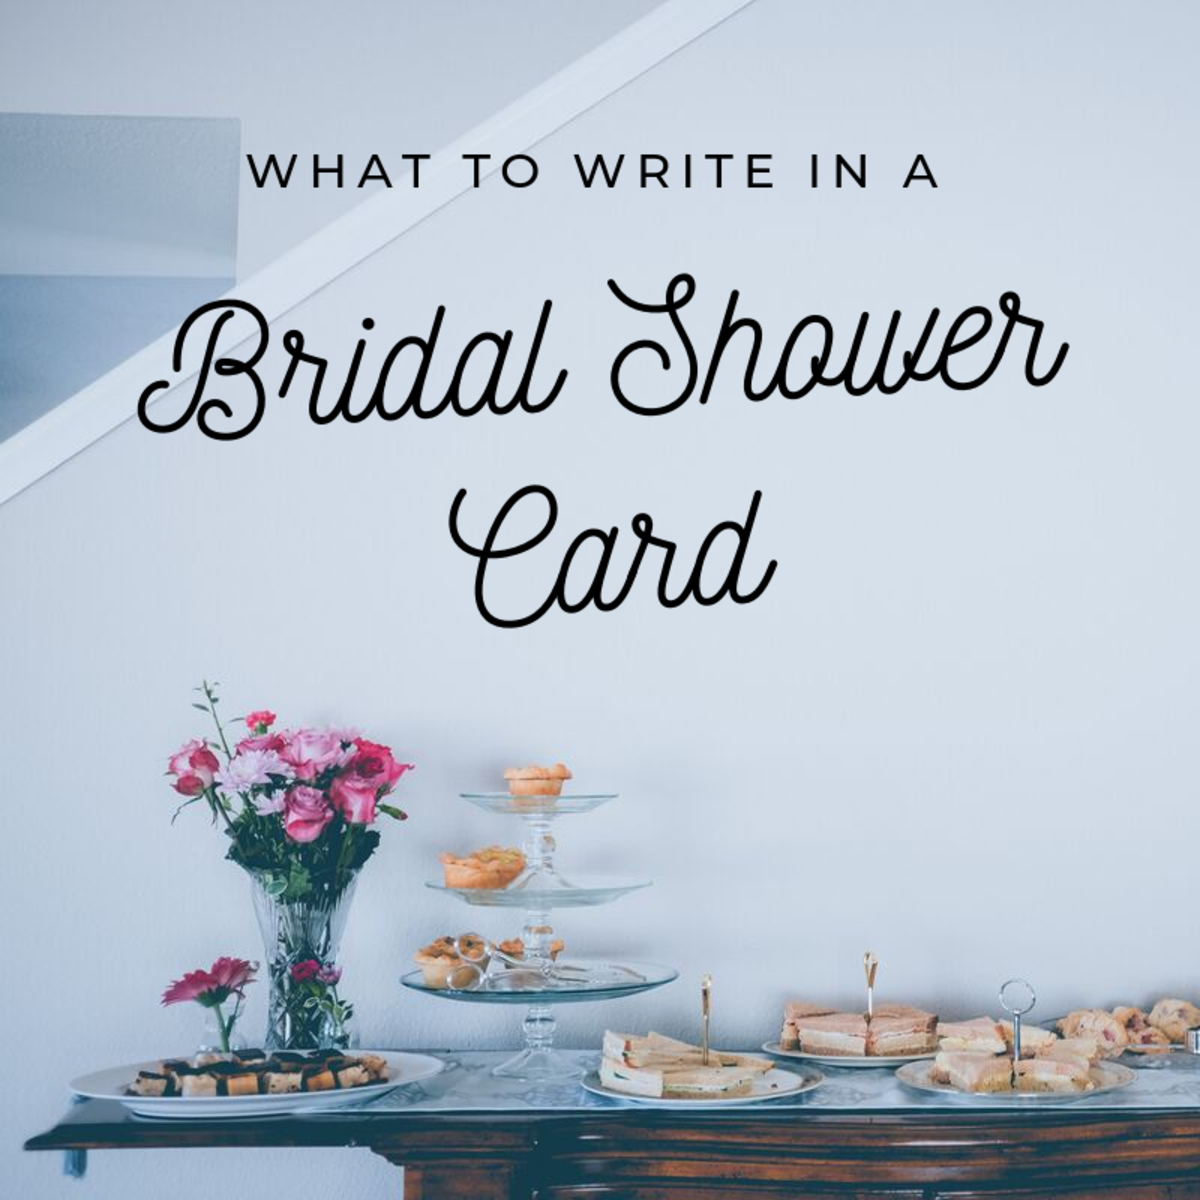 What To Write On A Bridal Shower Card Envelope Best Design Idea